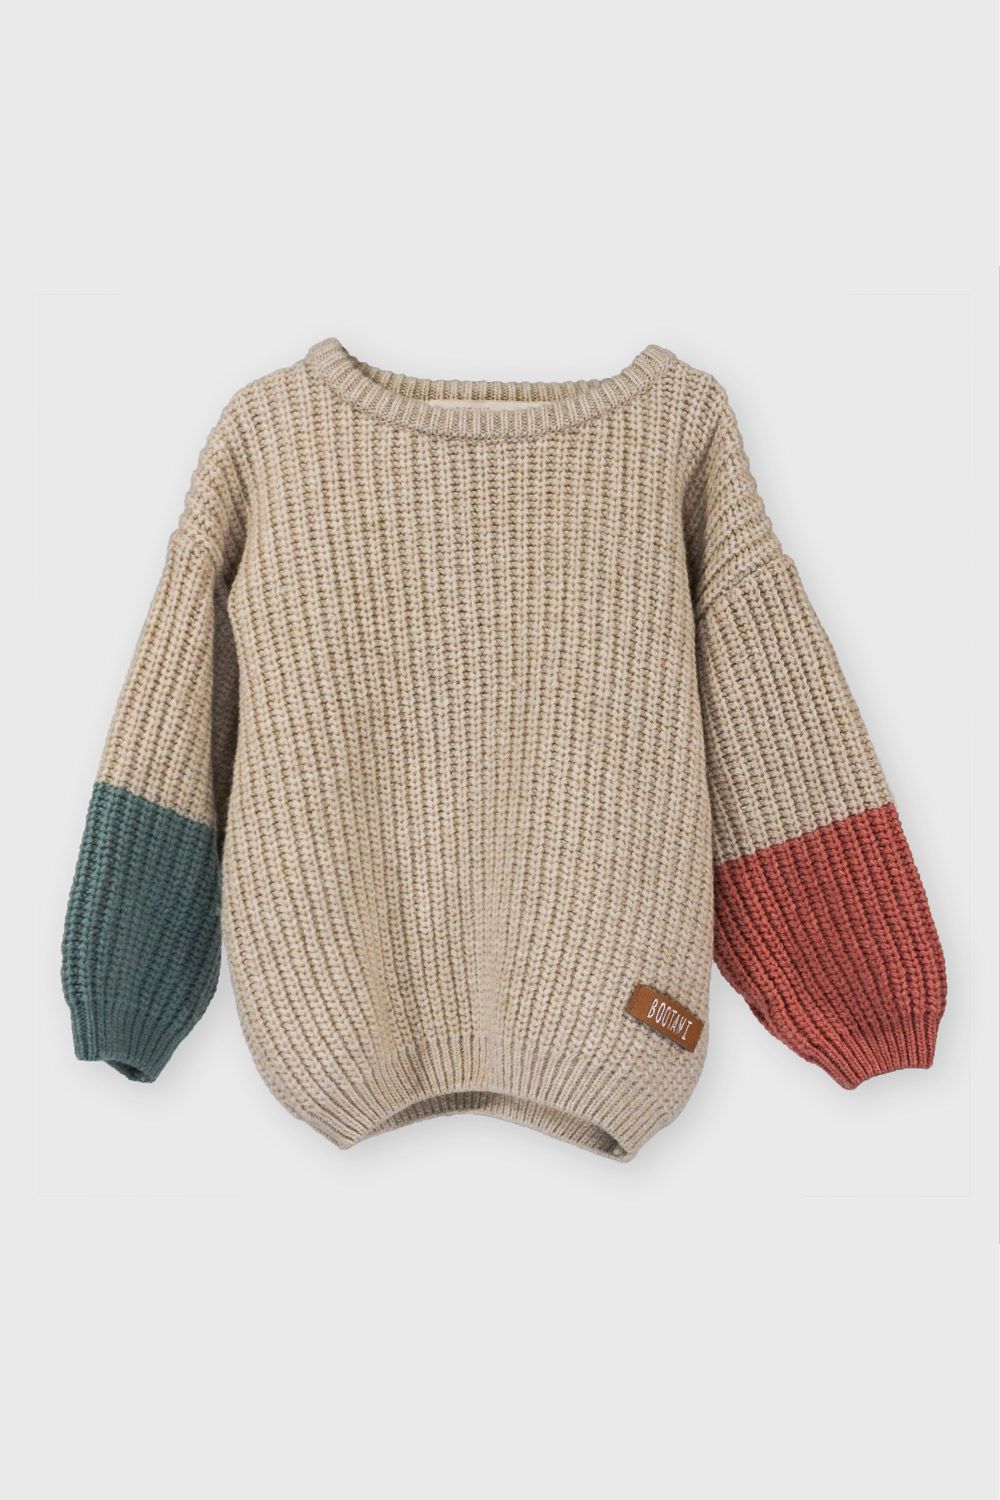 TRICOLOR KNITTED SWEATER